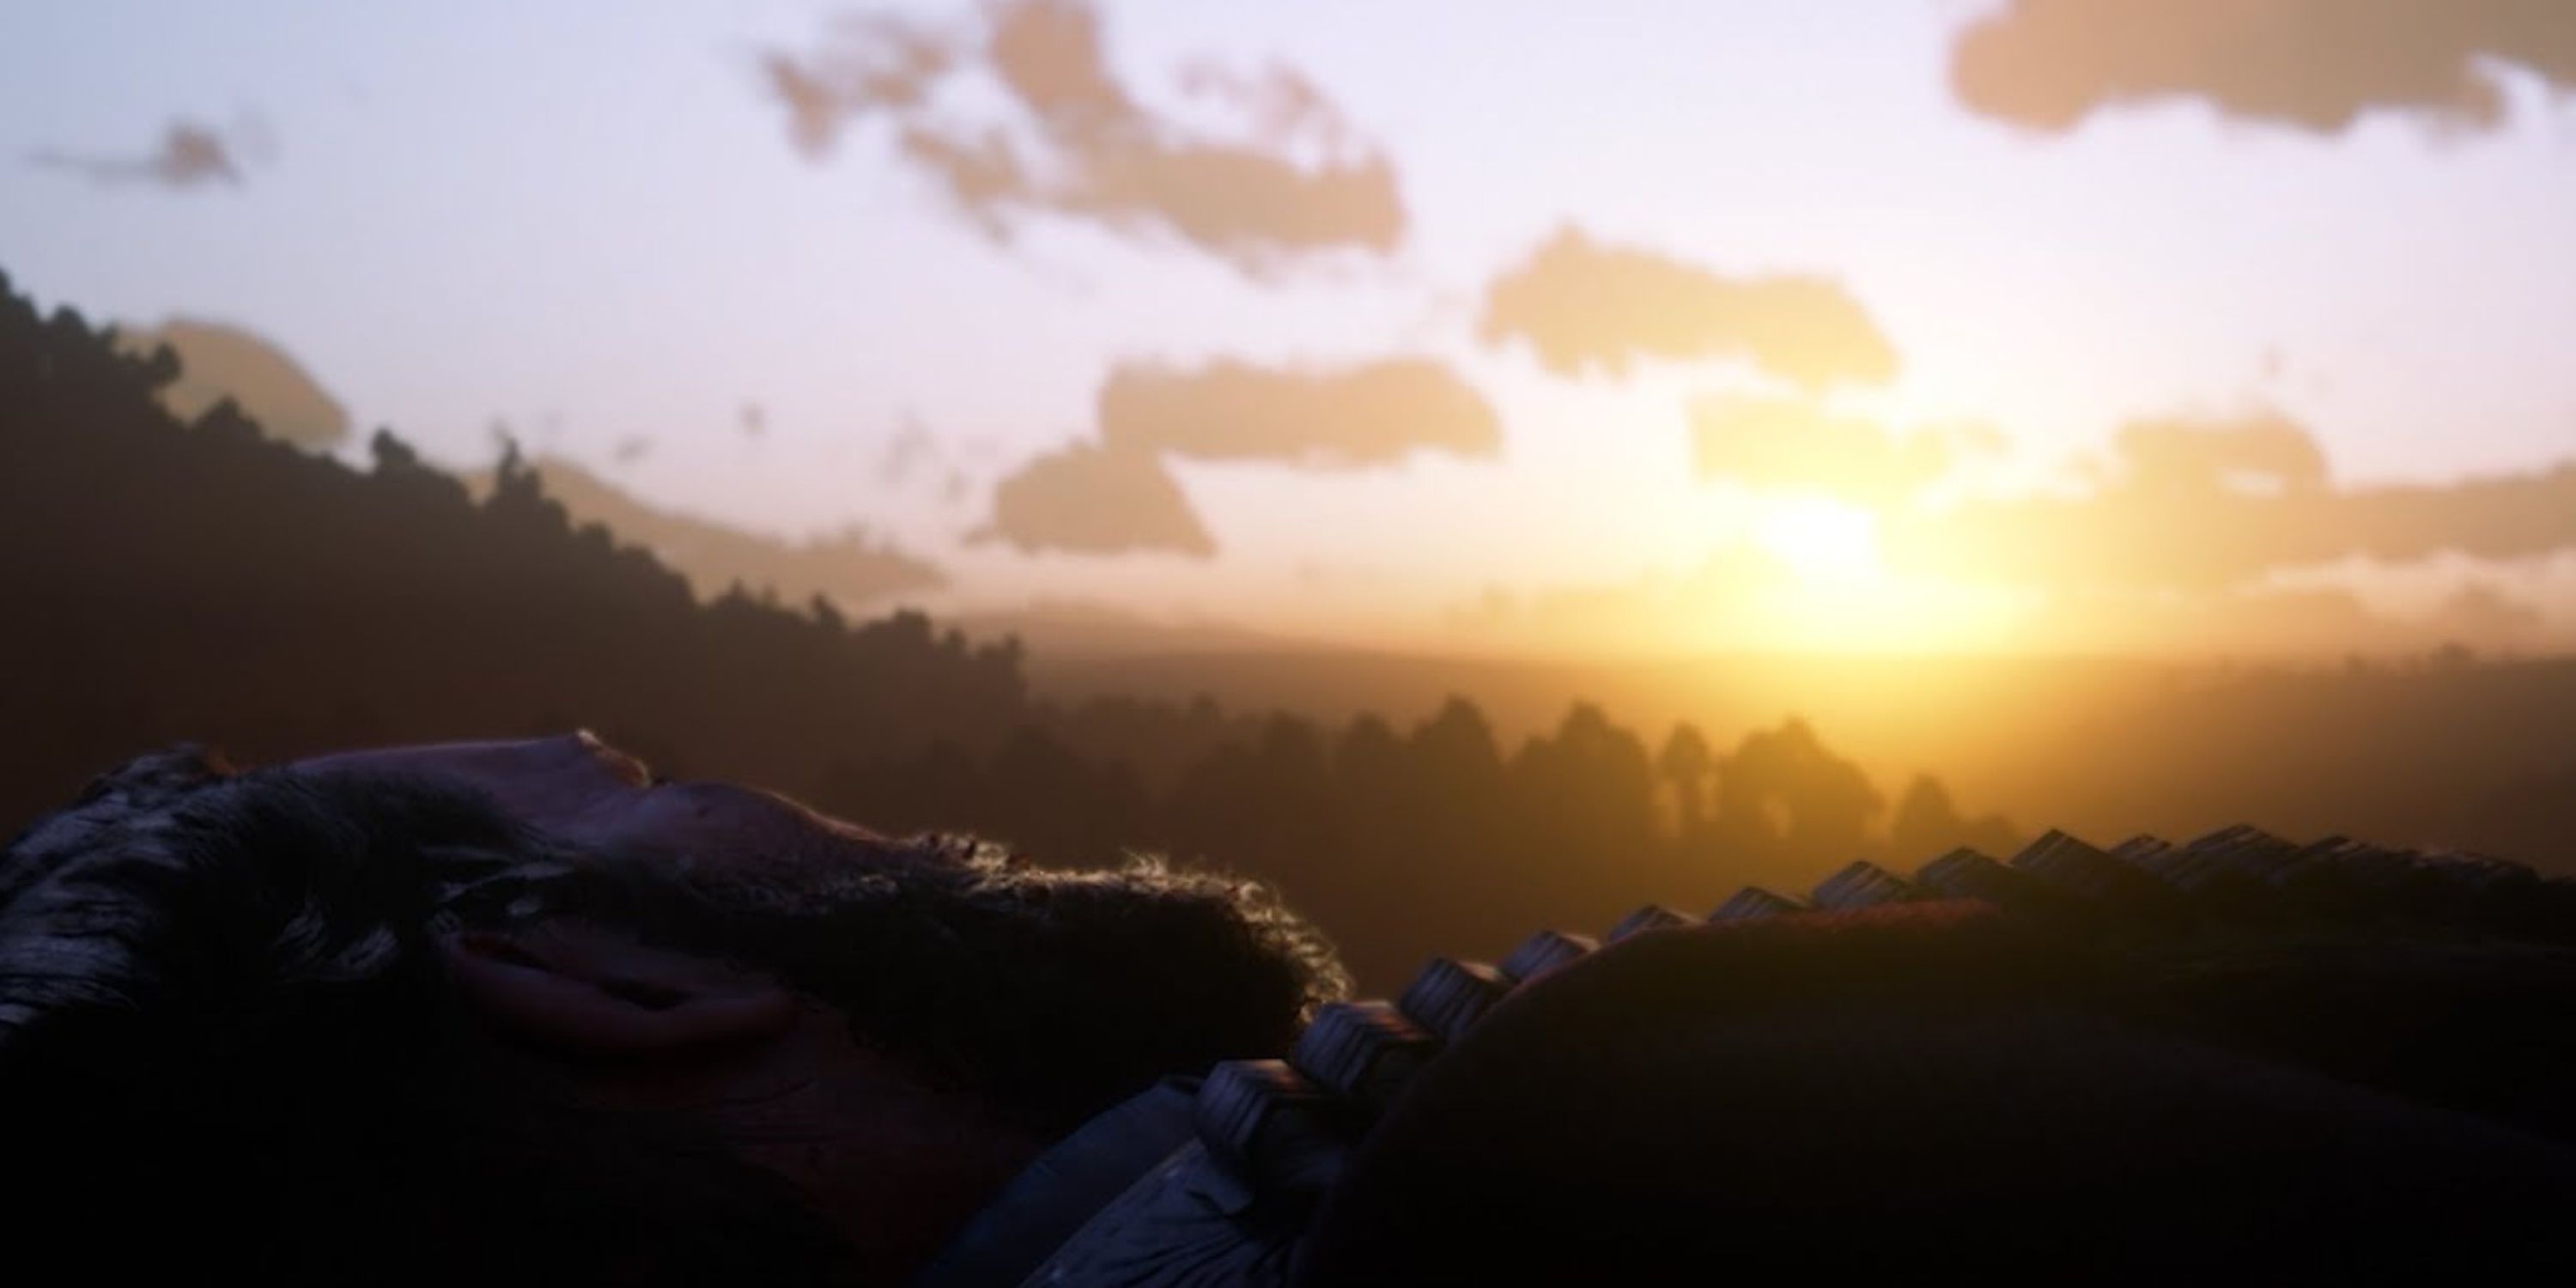 arthur morgan looking out to his last sunrise